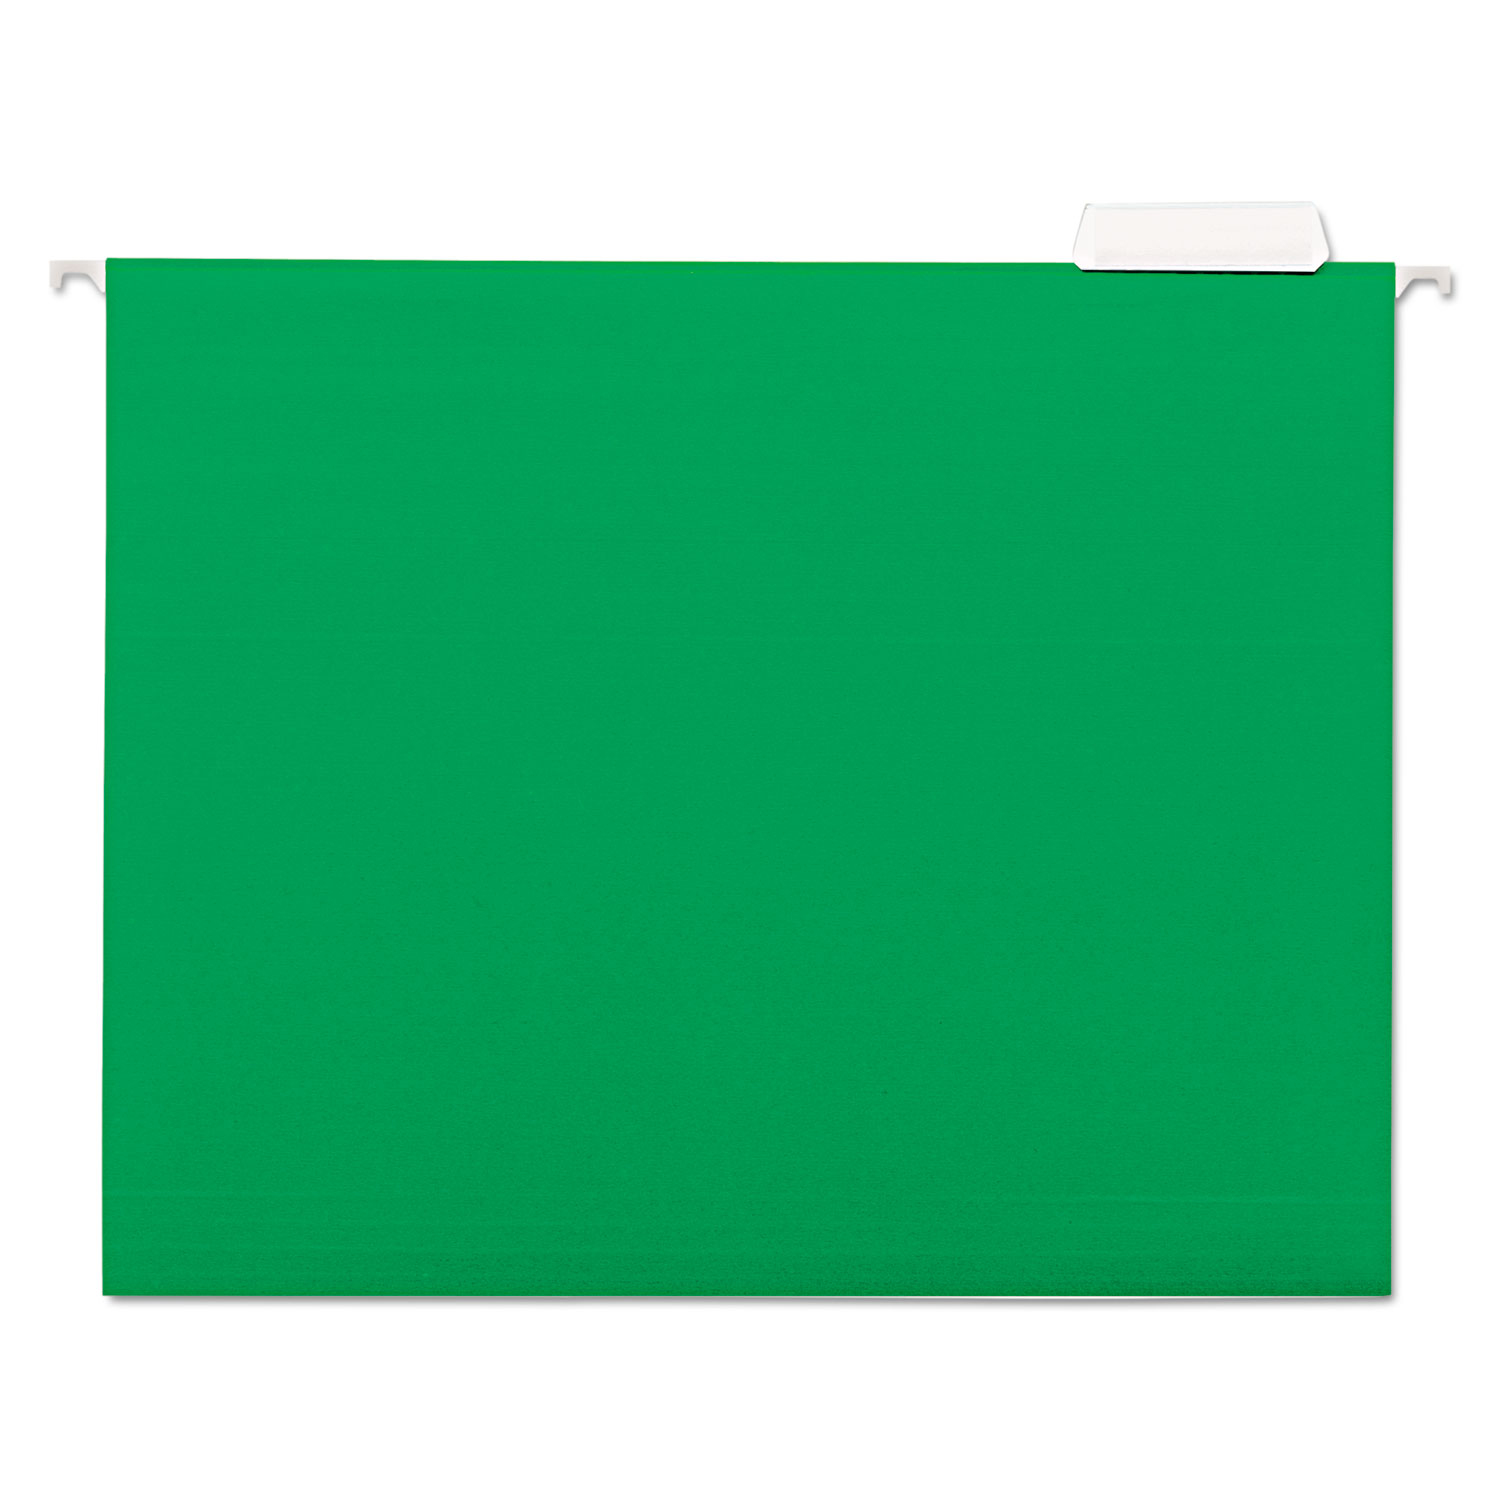  Universal UNV14117EE Deluxe Bright Color Hanging File Folders, Letter Size, 1/5-Cut Tab, Bright Green, 25/Box (UNV14117) 